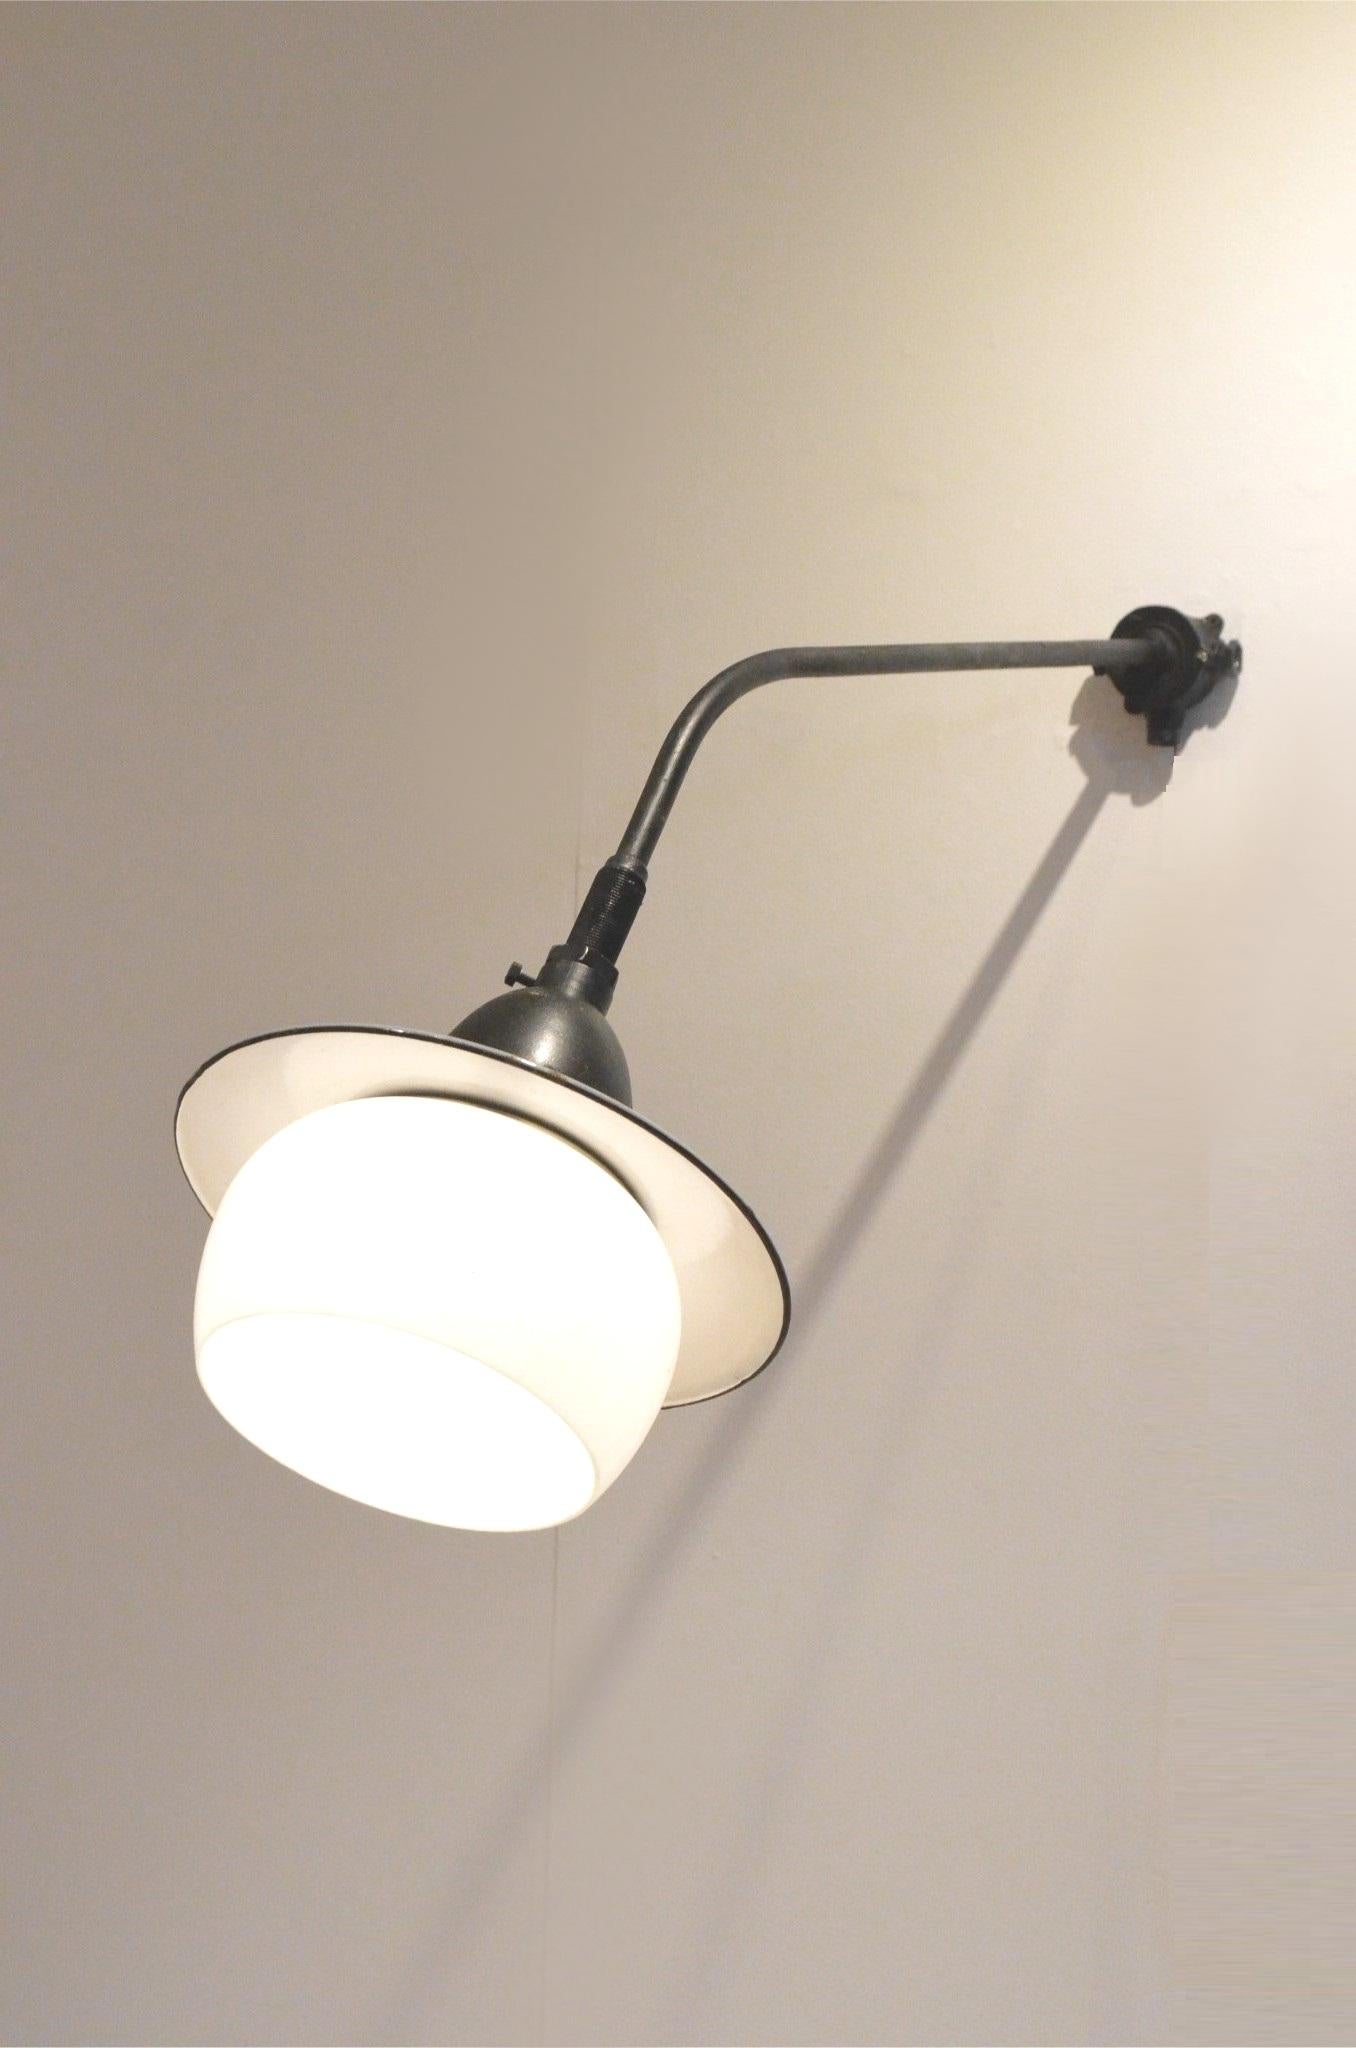 Midcentury Design ZAL 30/02 Industrial Lamp by Philips For Sale 4